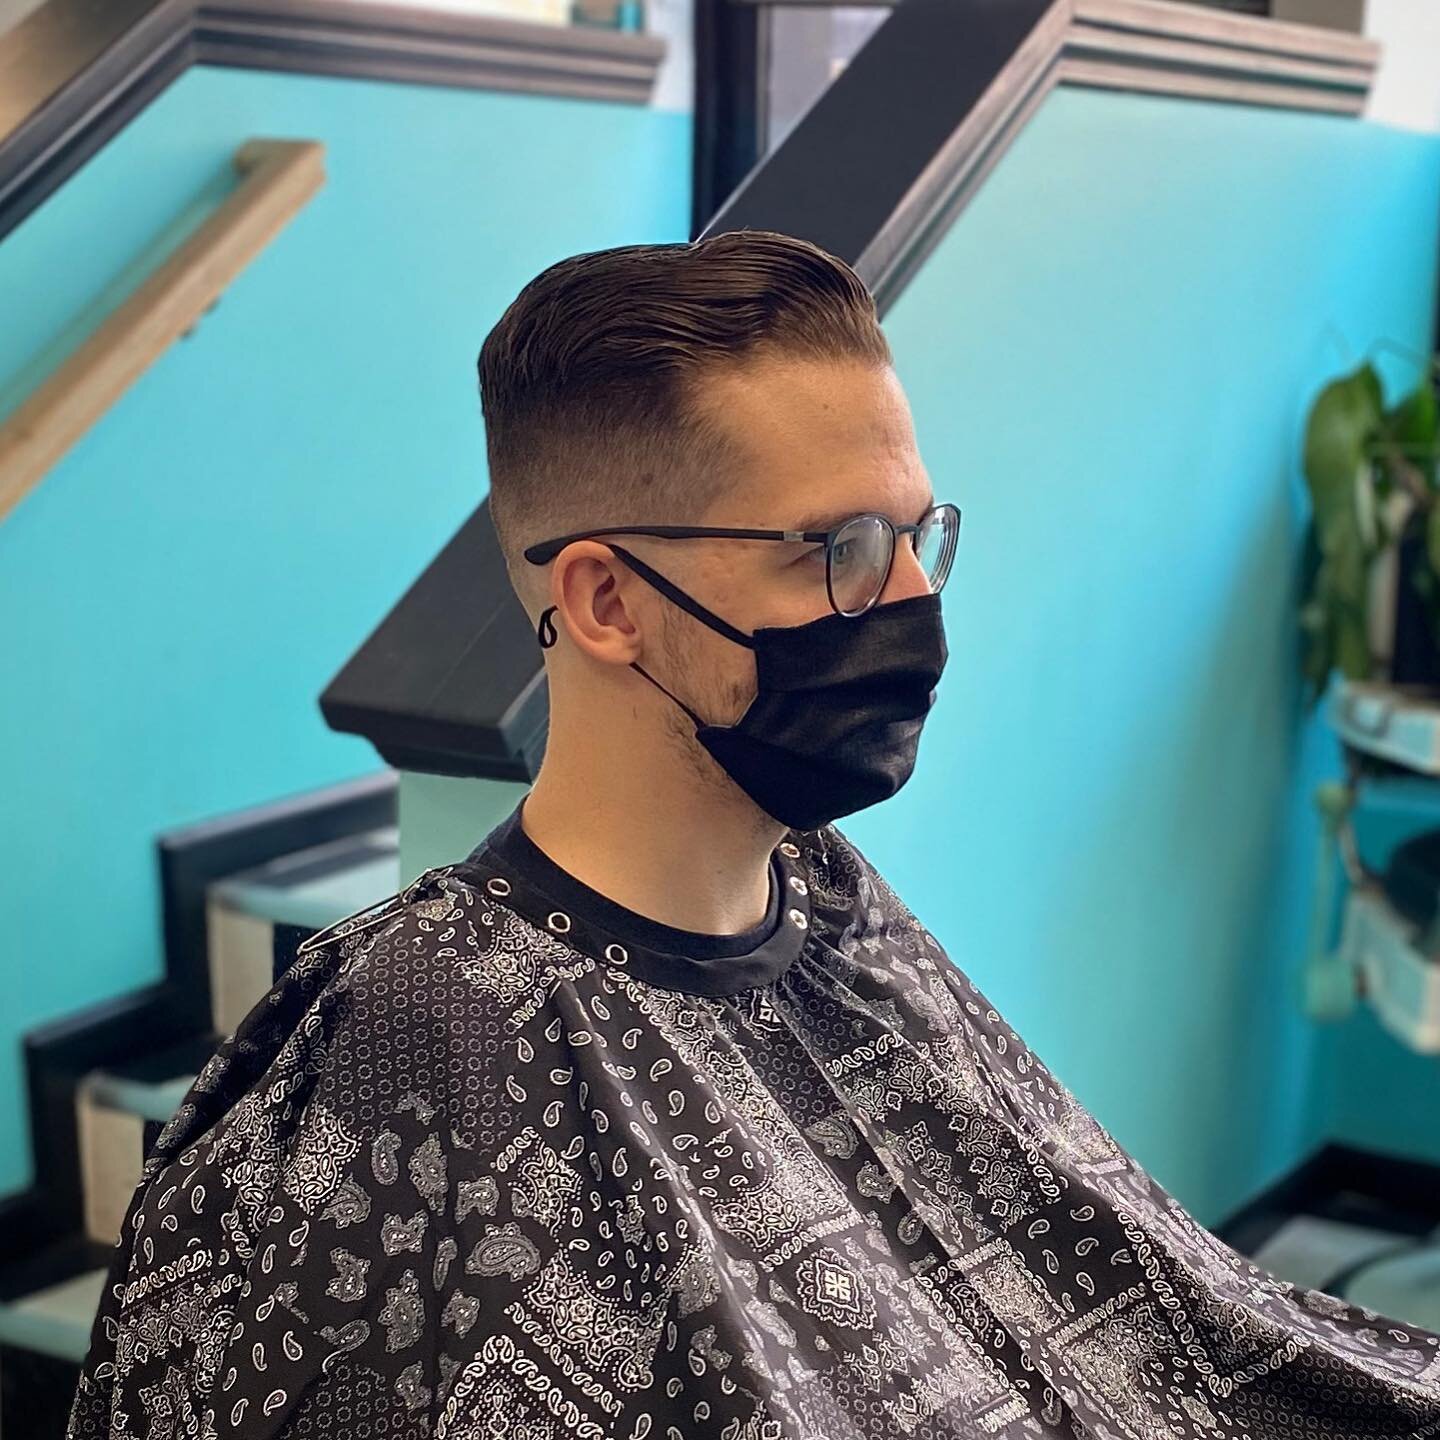 Appointments available at www.foolslovebarber.com Held in place with @uppercutdeluxe Easy Hold

✨💈🎲🐇💈✨

#foolslovebarbershop #foolslove #lookgoodfeelgood #lookyourbest #slickanddestroy #uppercutdeluxe #ucdapproved #barber #barbershop #hair #hairc